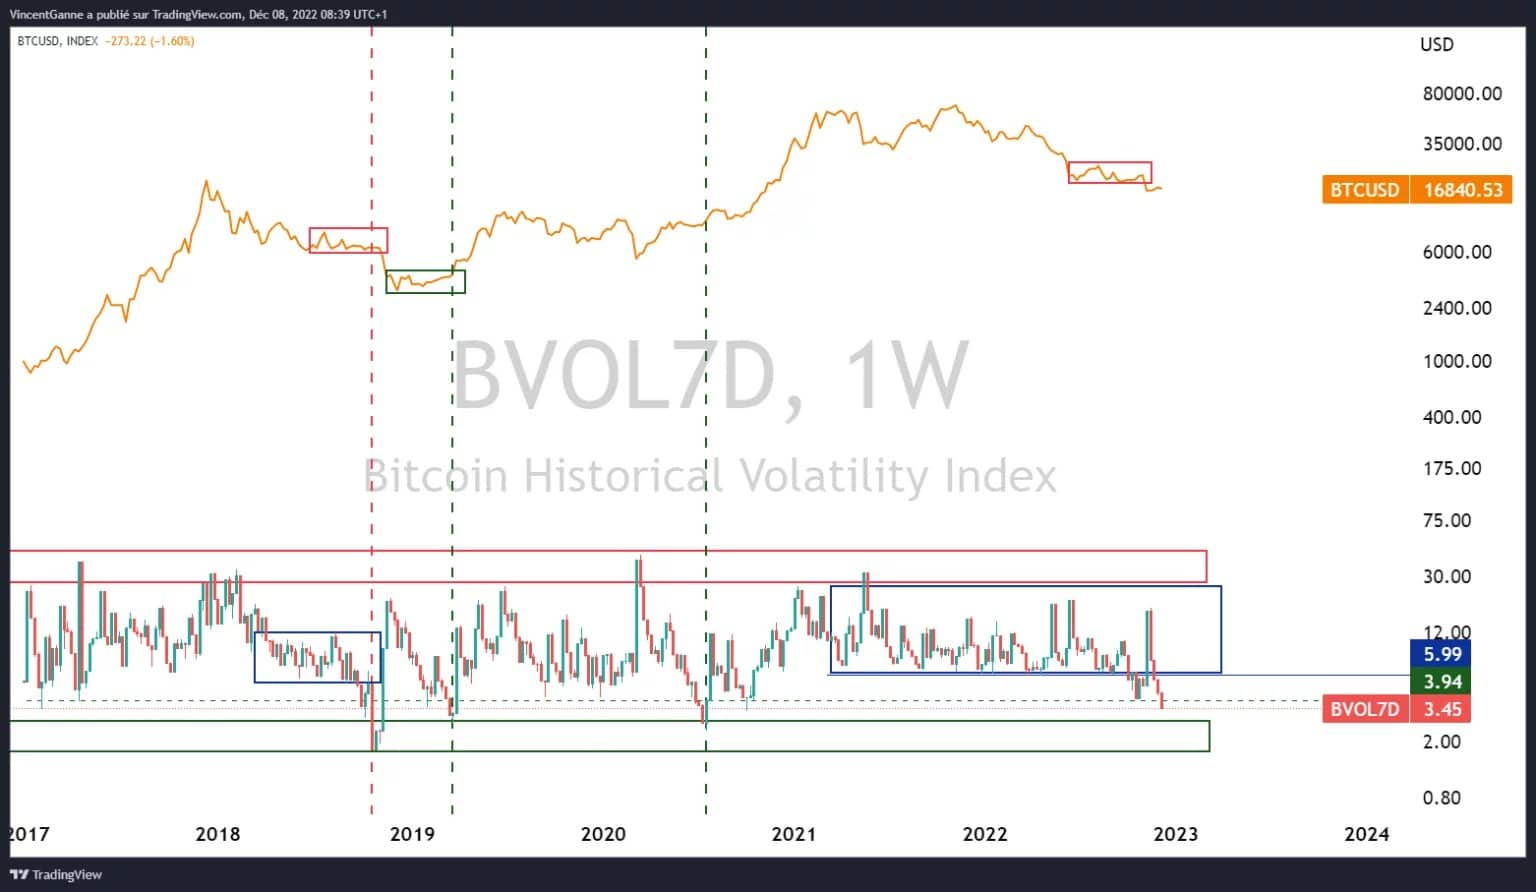 Figure 2: Historical 7-day volatility in weekly Bitcoin price data